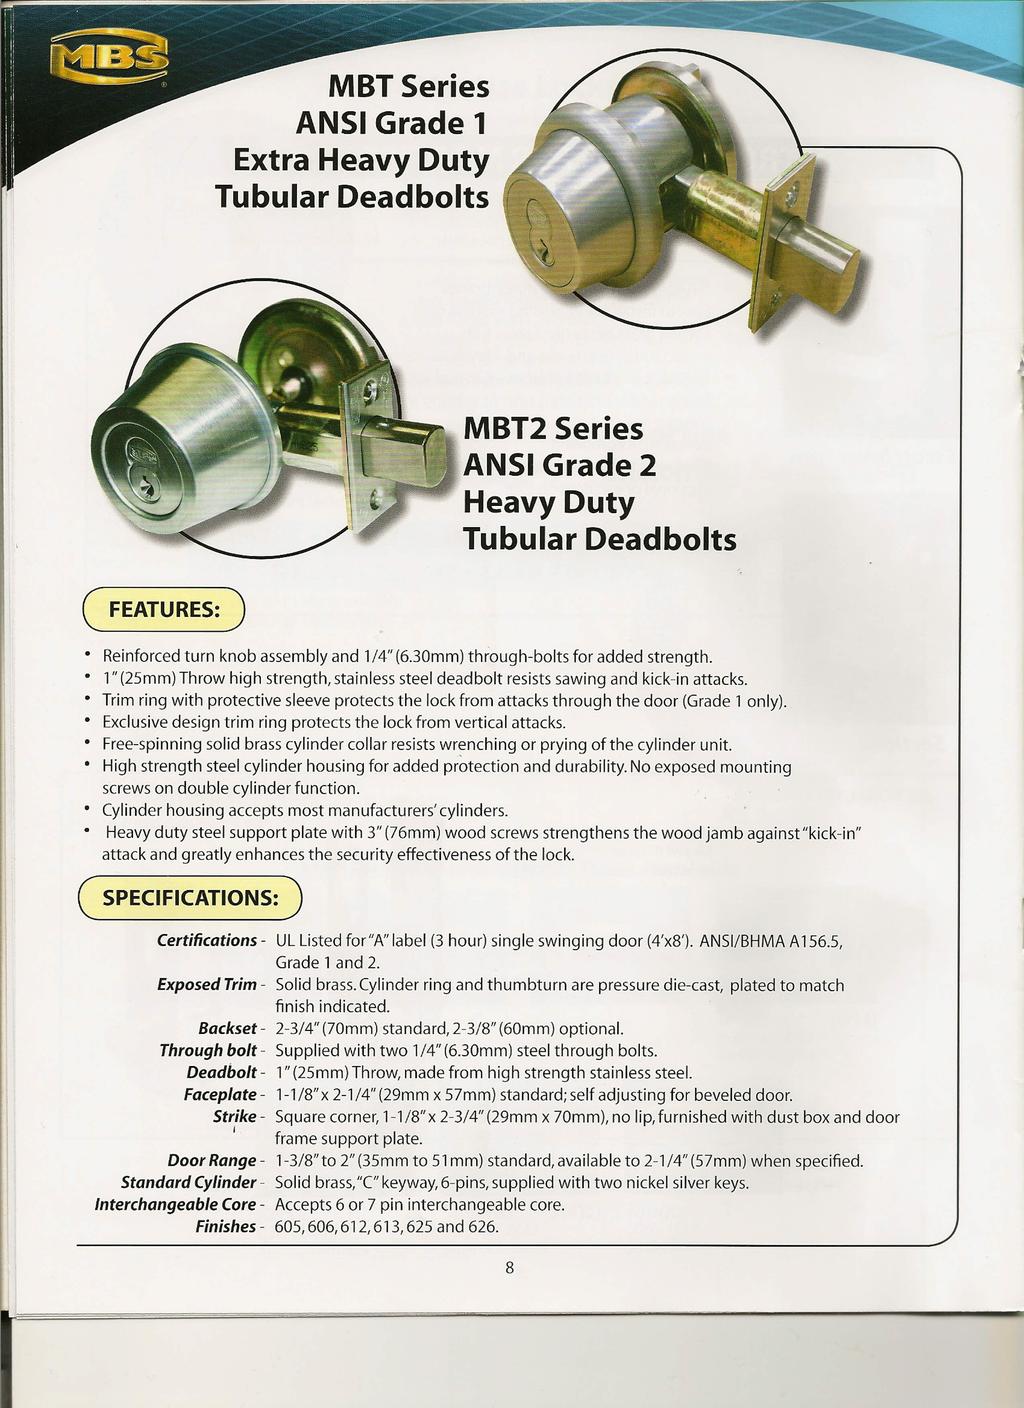 MBT Series ANSI Grade 1 Extra Heavy Duty Tubular Deadbolts MBT2 Series ANSI Grade 2 Heavy Duty Tubular Deadbolts ( FEATURES: ) Reinforced turn knob assembly and 1/4" (6.